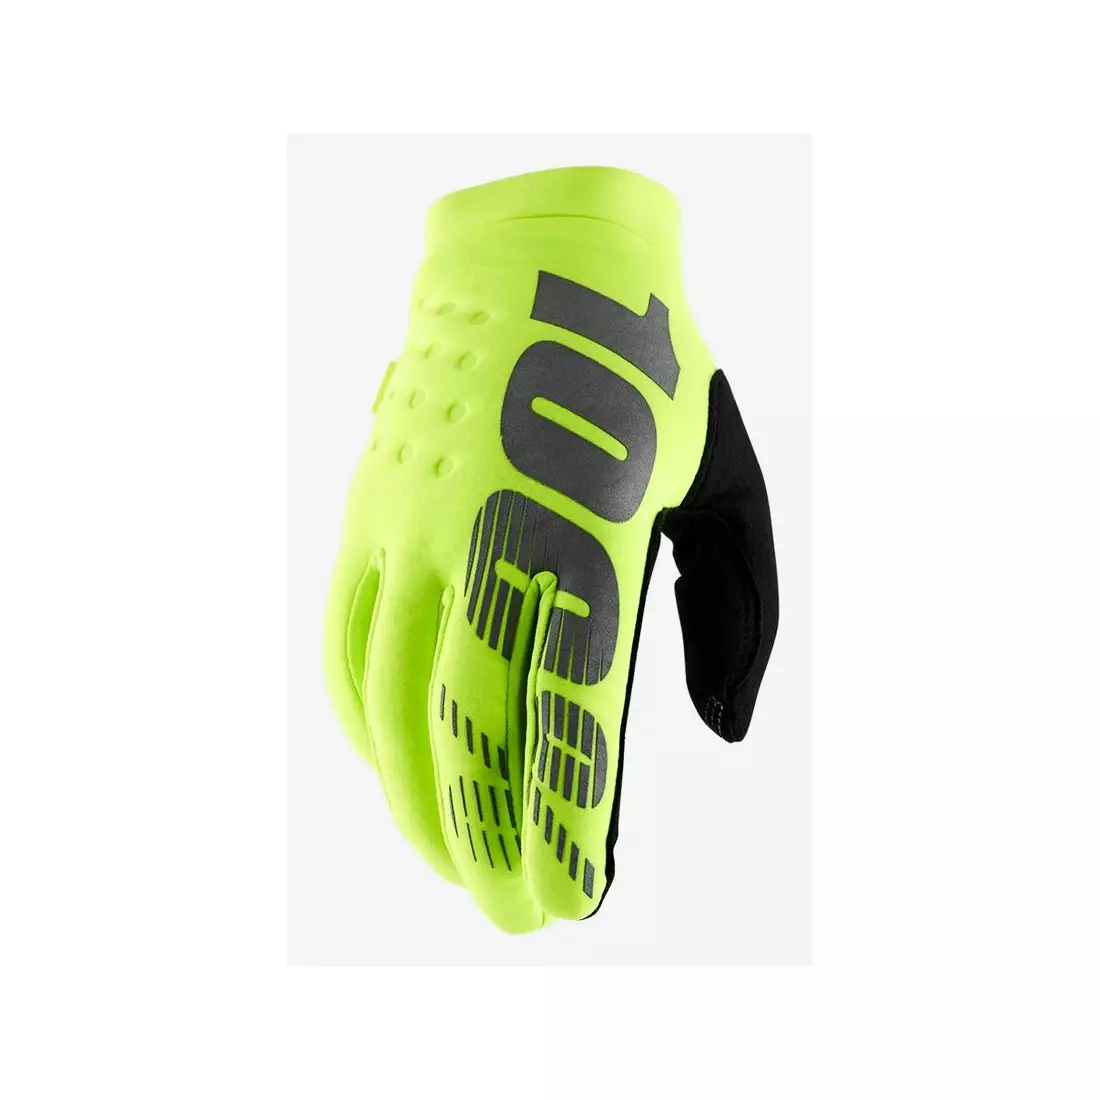 100% junior cycling gloves BRISKER fluo yellow STO-10016-004-06